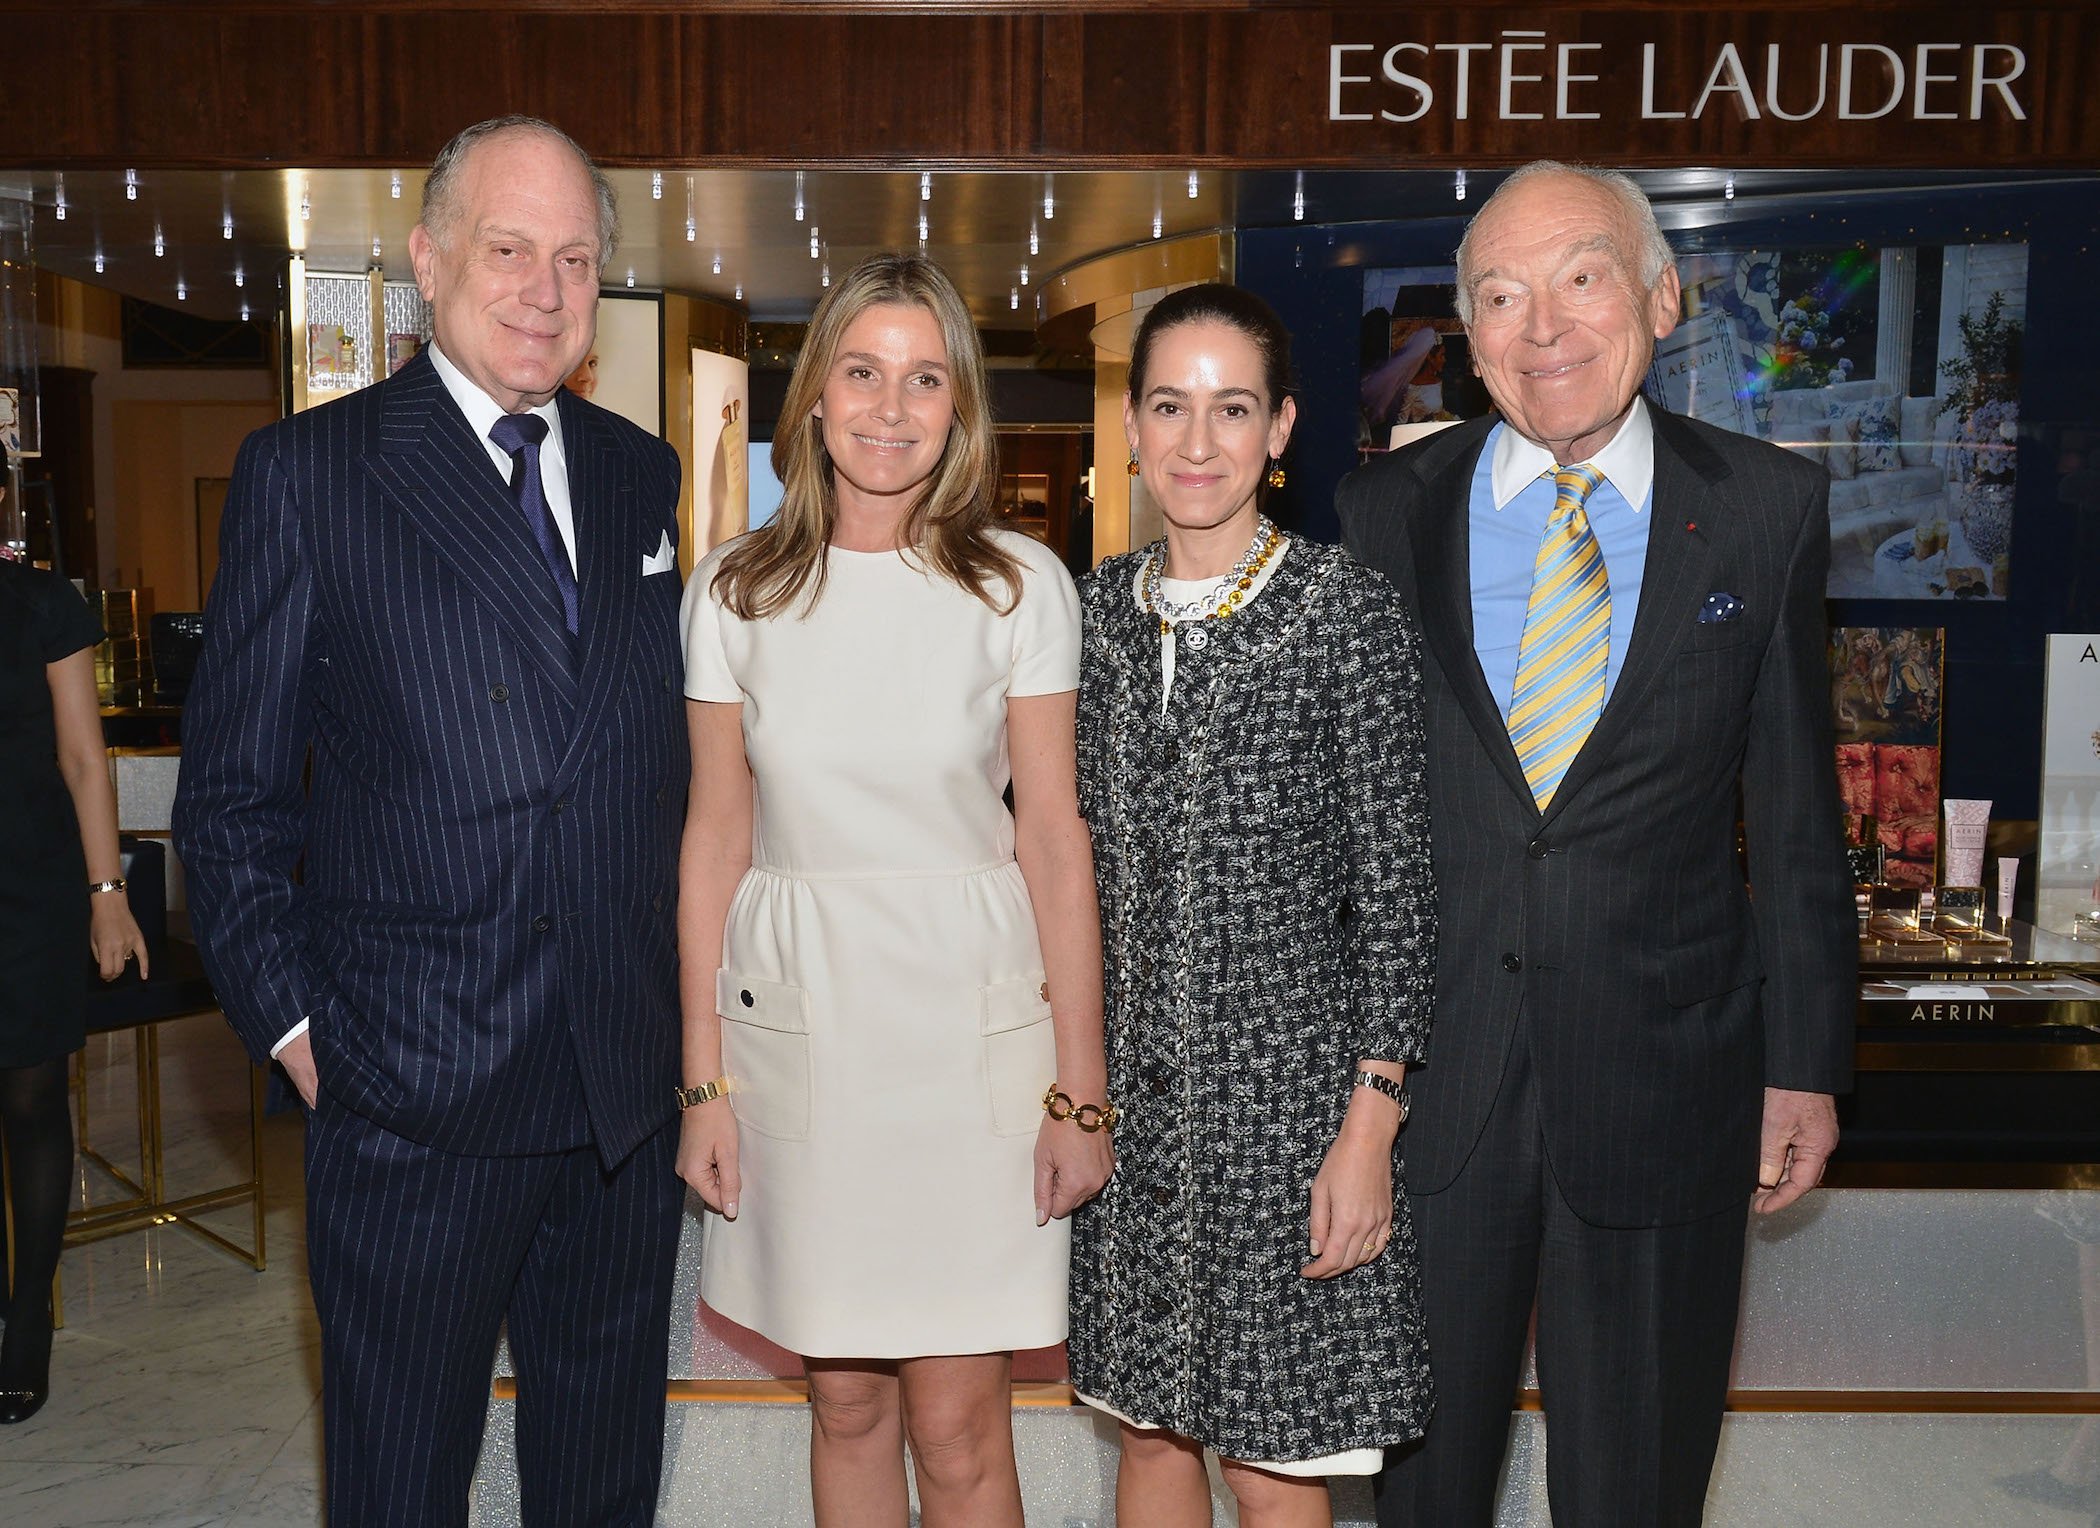 Fortunes Of Five Lauder Family Members Rise A Combined $3.1 Billion  Following Strong Estée Lauder Earnings Report